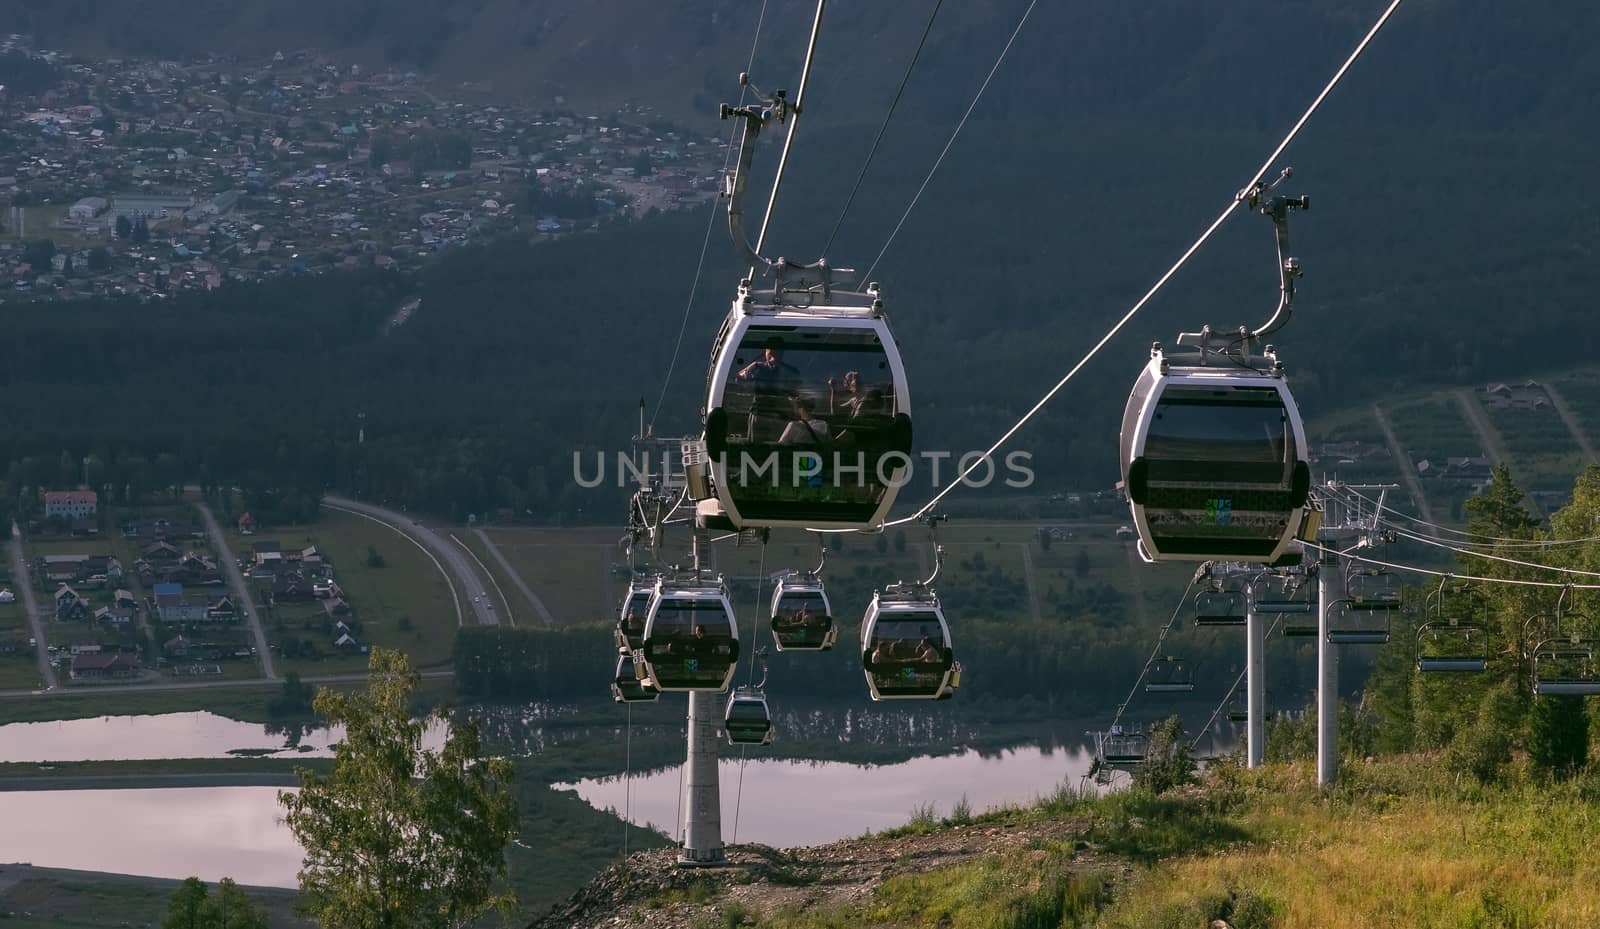 Manzherok resort, Altai Mountains, Russia - August 12, 2020: High angle shot of cableway with tourists inside cable cars on a cityscape and landscape background